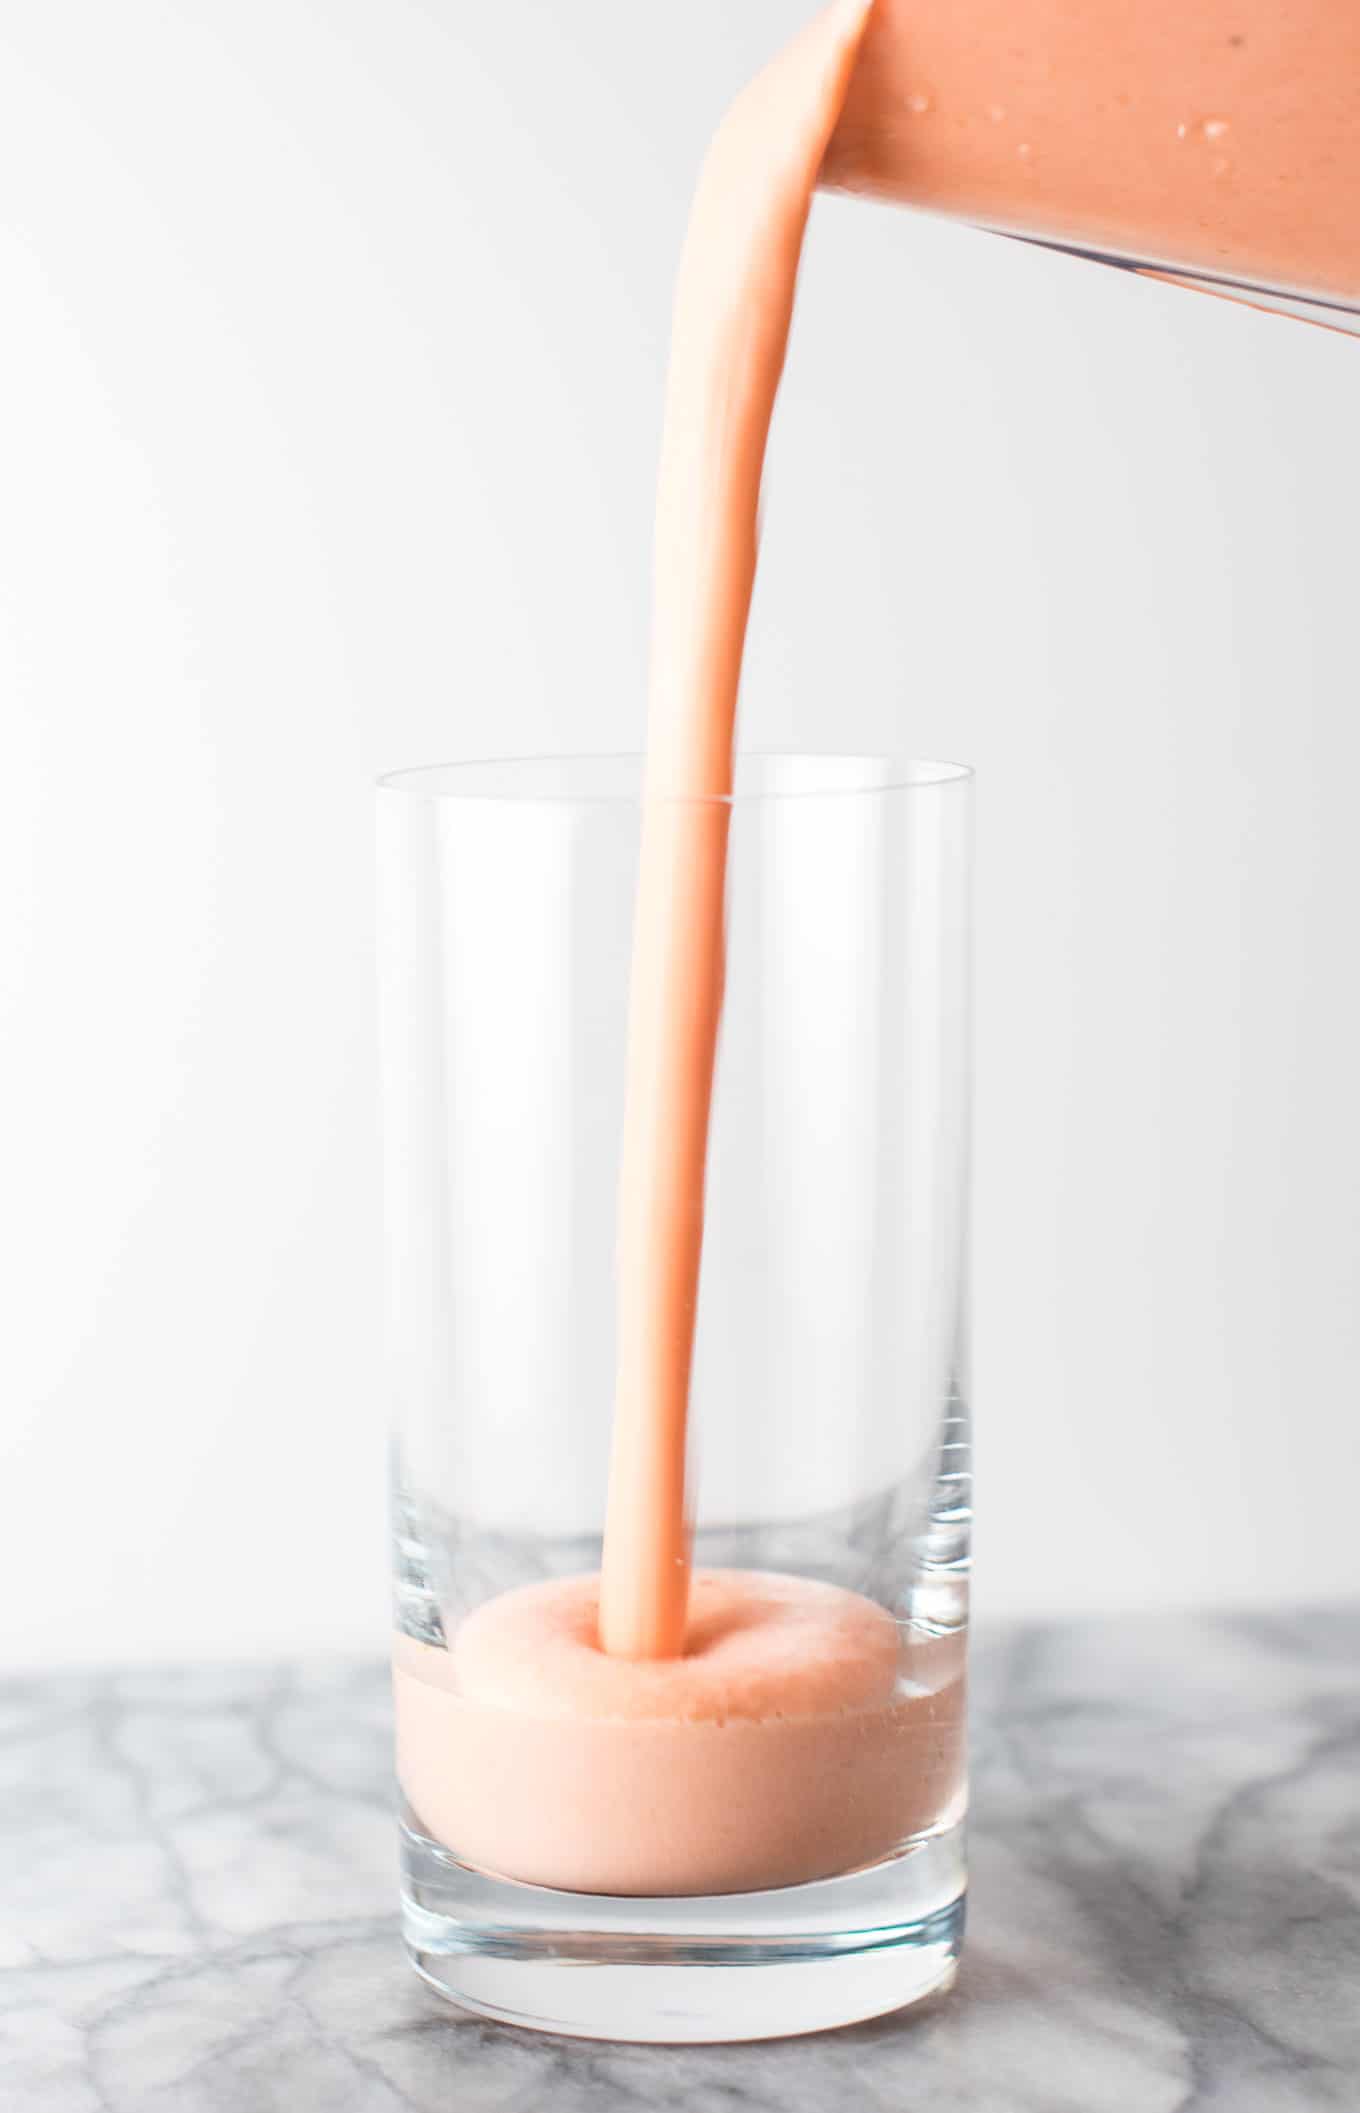 smoothie being poured into a glass